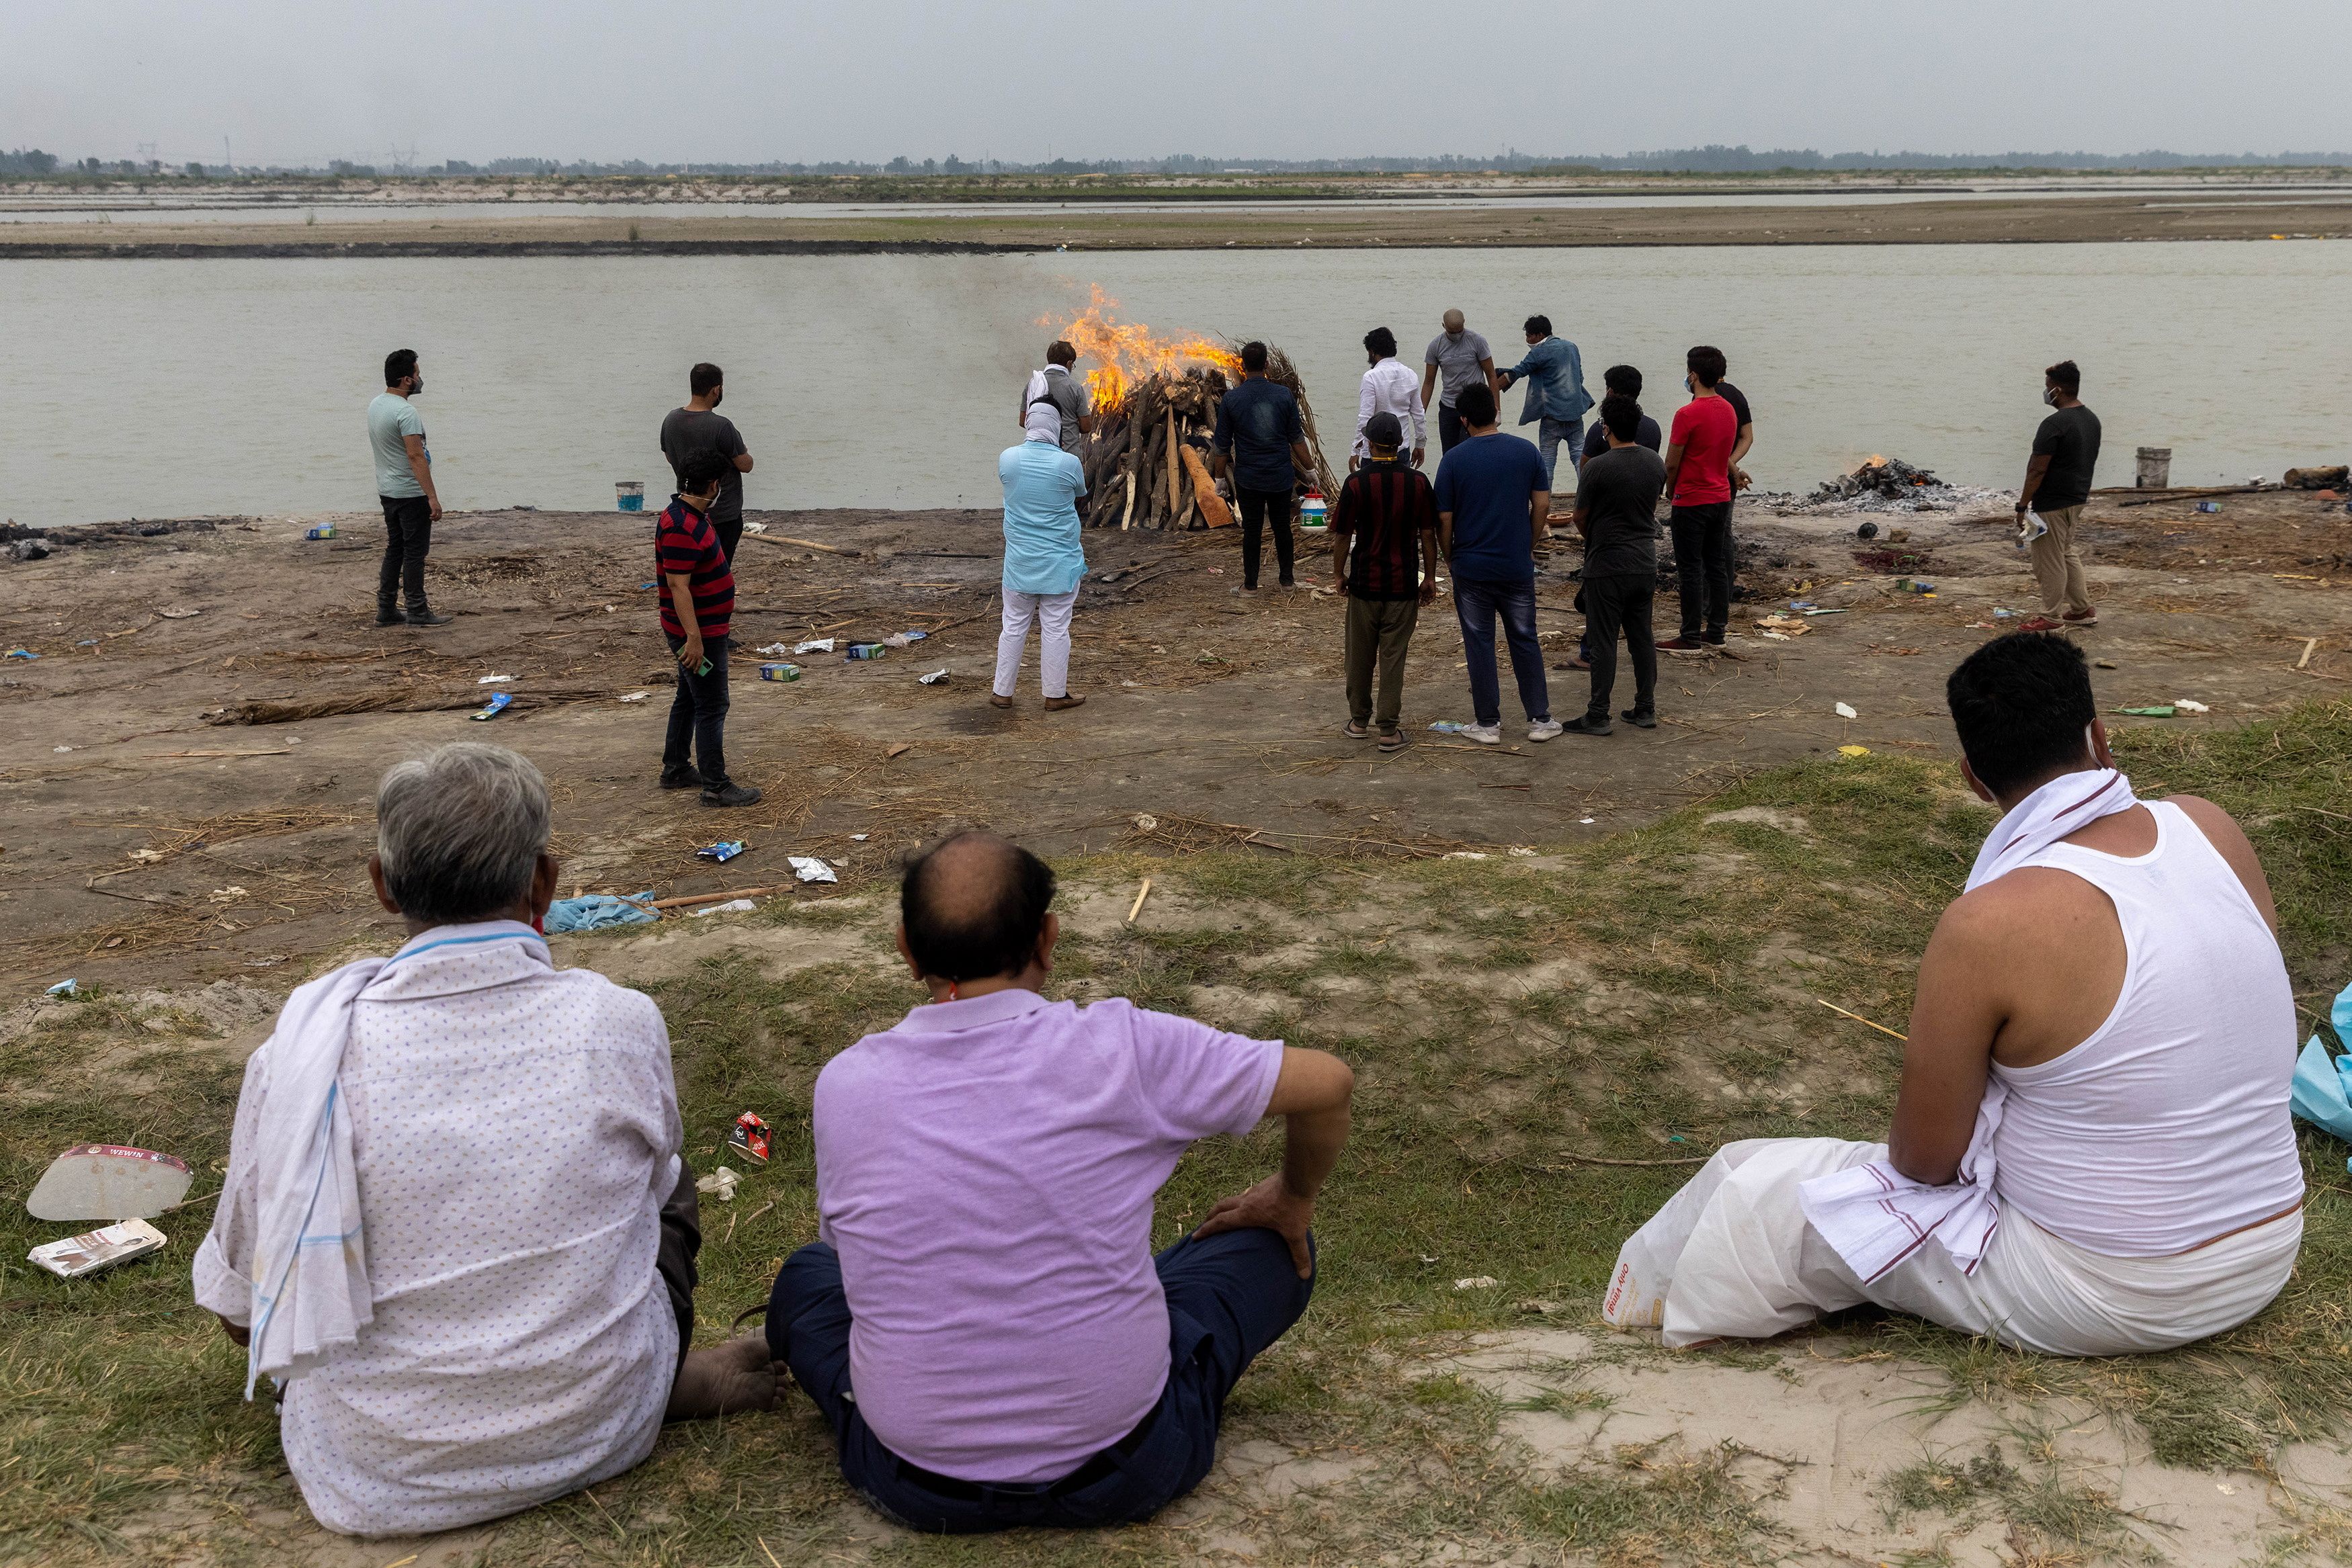 Relatives watch during the cremation of a man who died from the coronavirus disease (COVID-19), on the banks of the river Ganges at Garhmukteshwar in the northern state of Uttar Pradesh